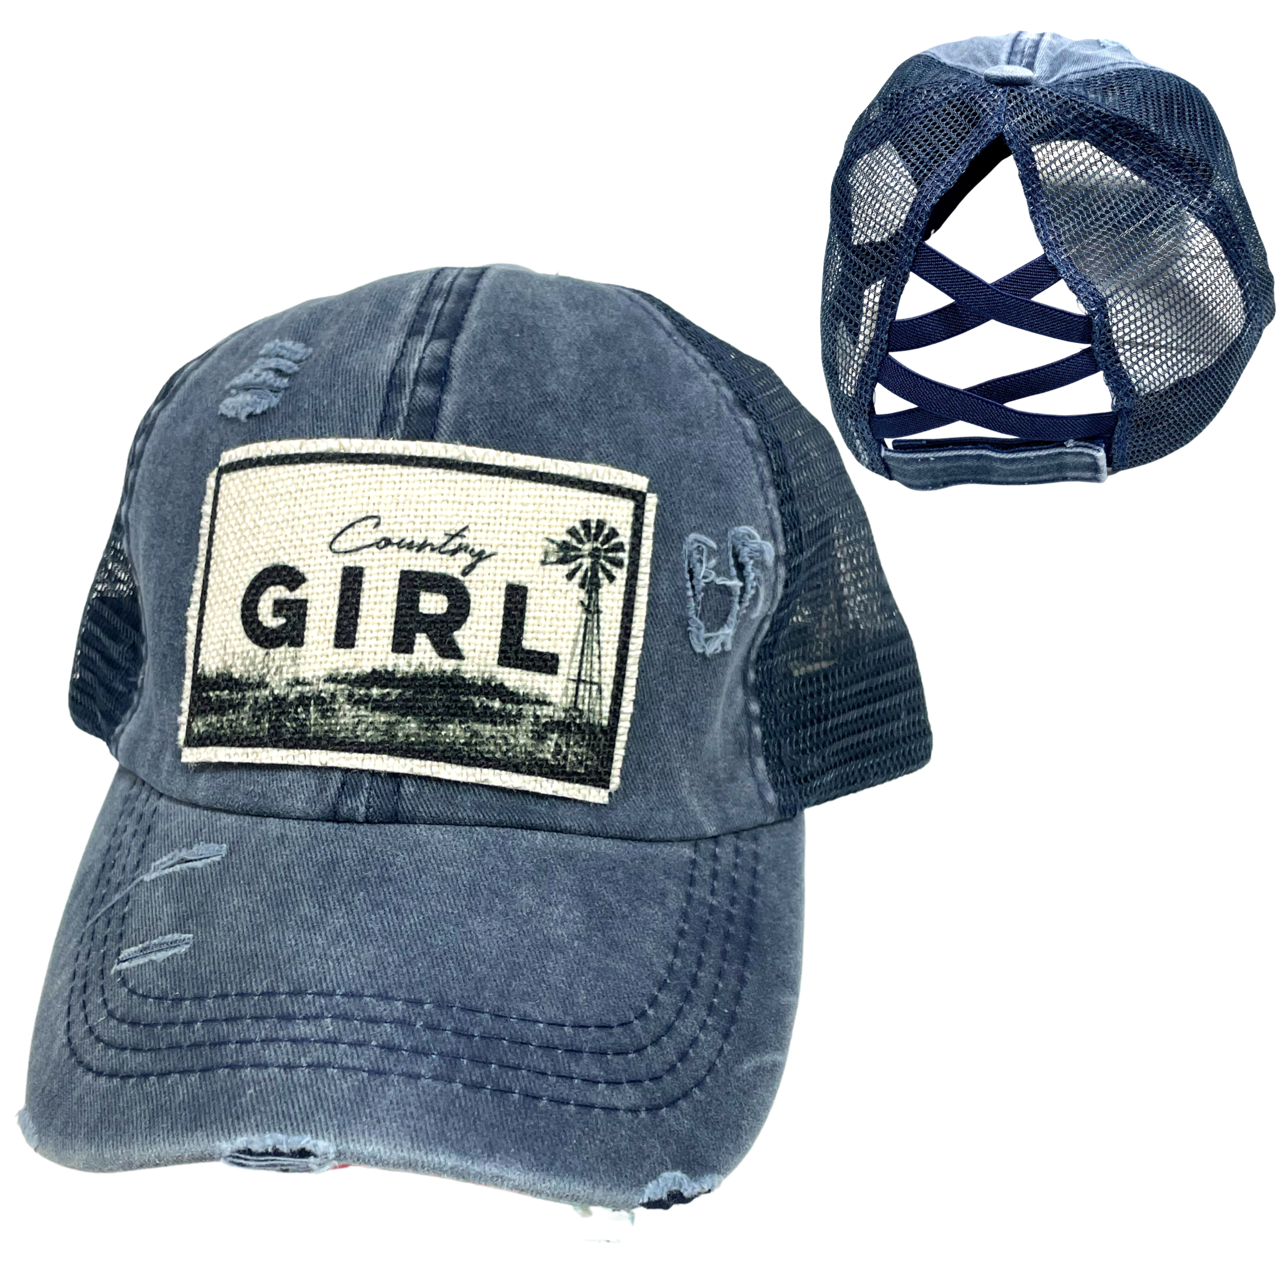 COUNTRY GIRL CRISS-CROSS PONYTAIL HAT